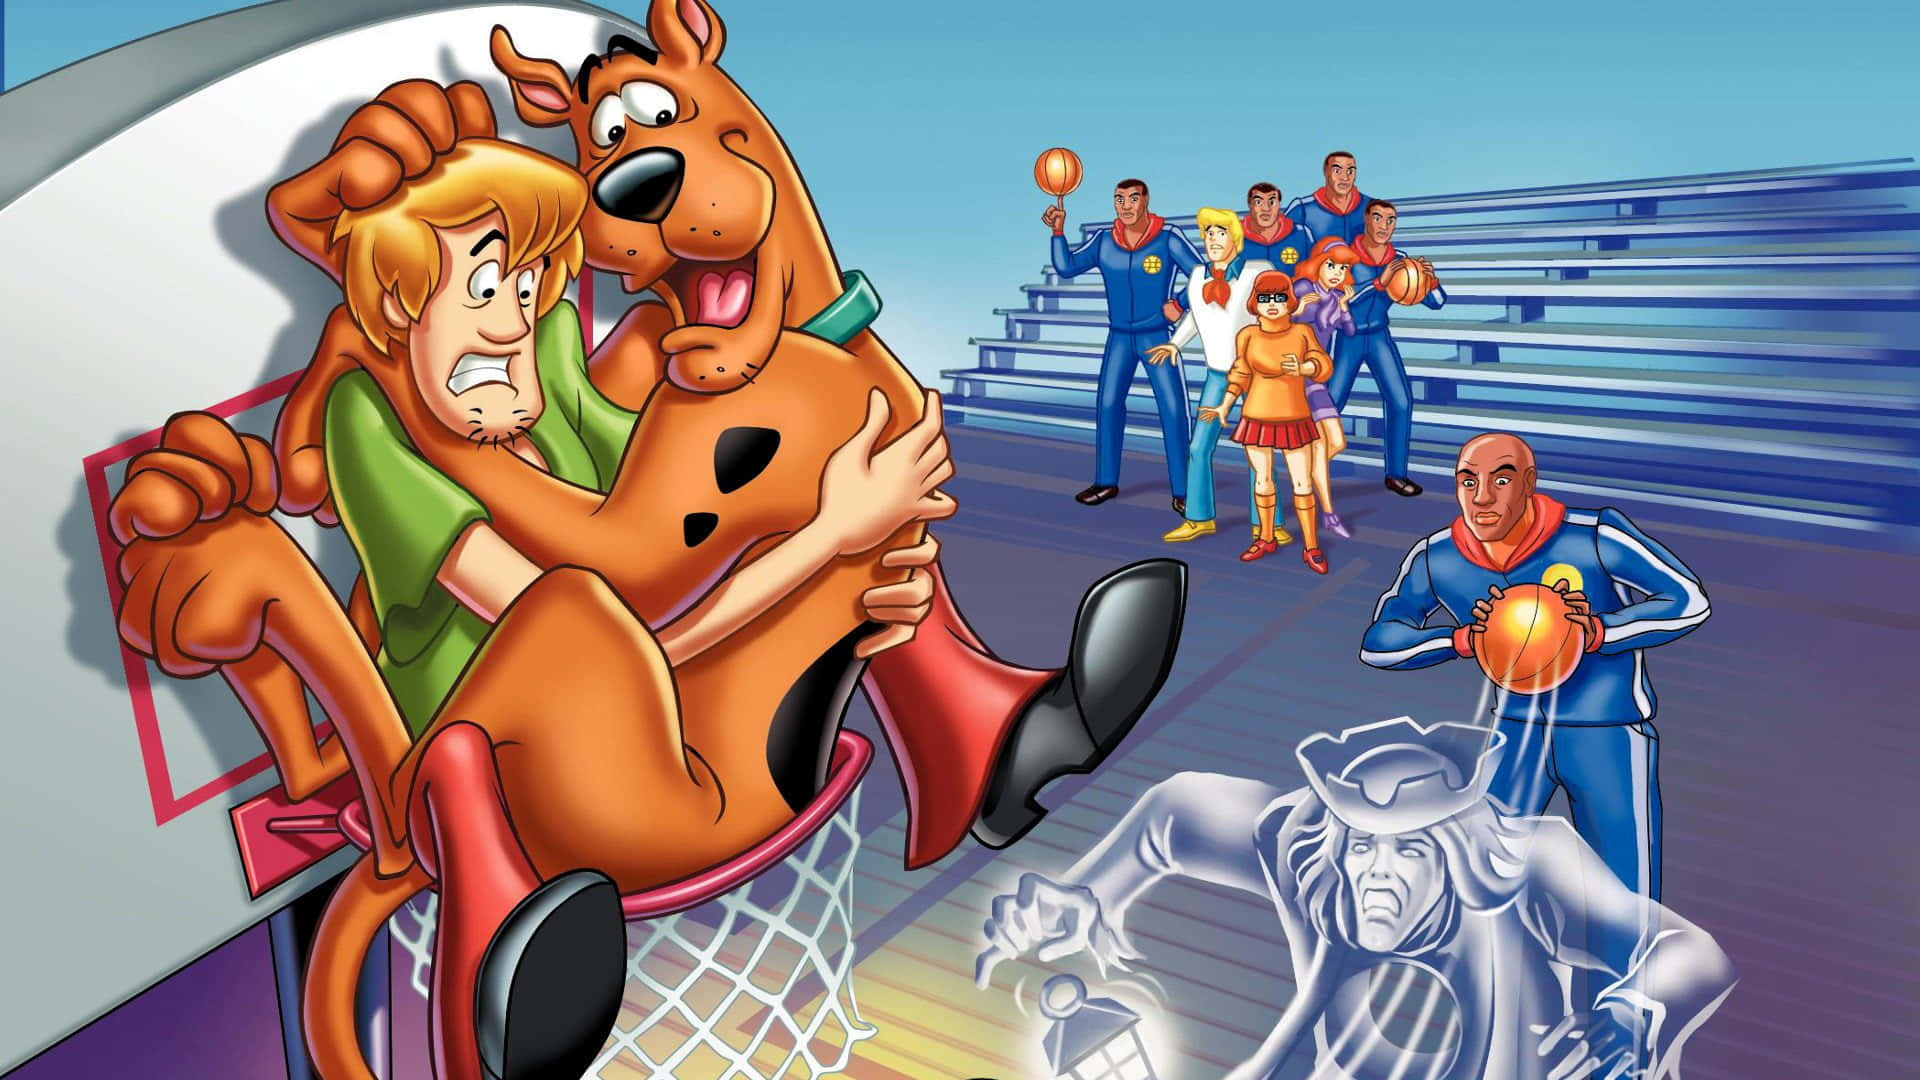 Scooby Doo And The Basketball Team